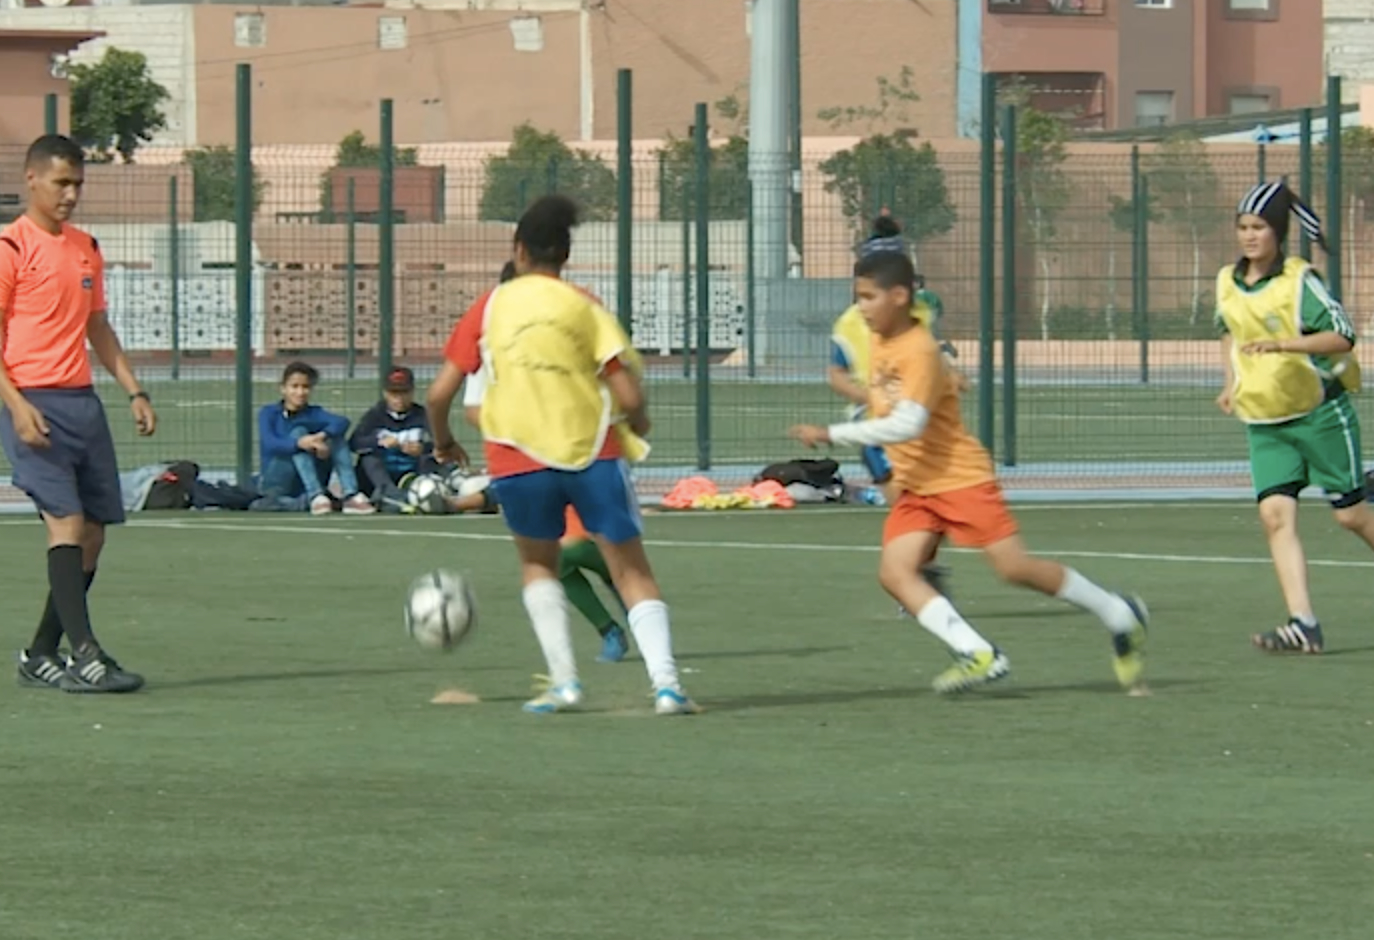 Mixed football training: junior women's team against younger boys in